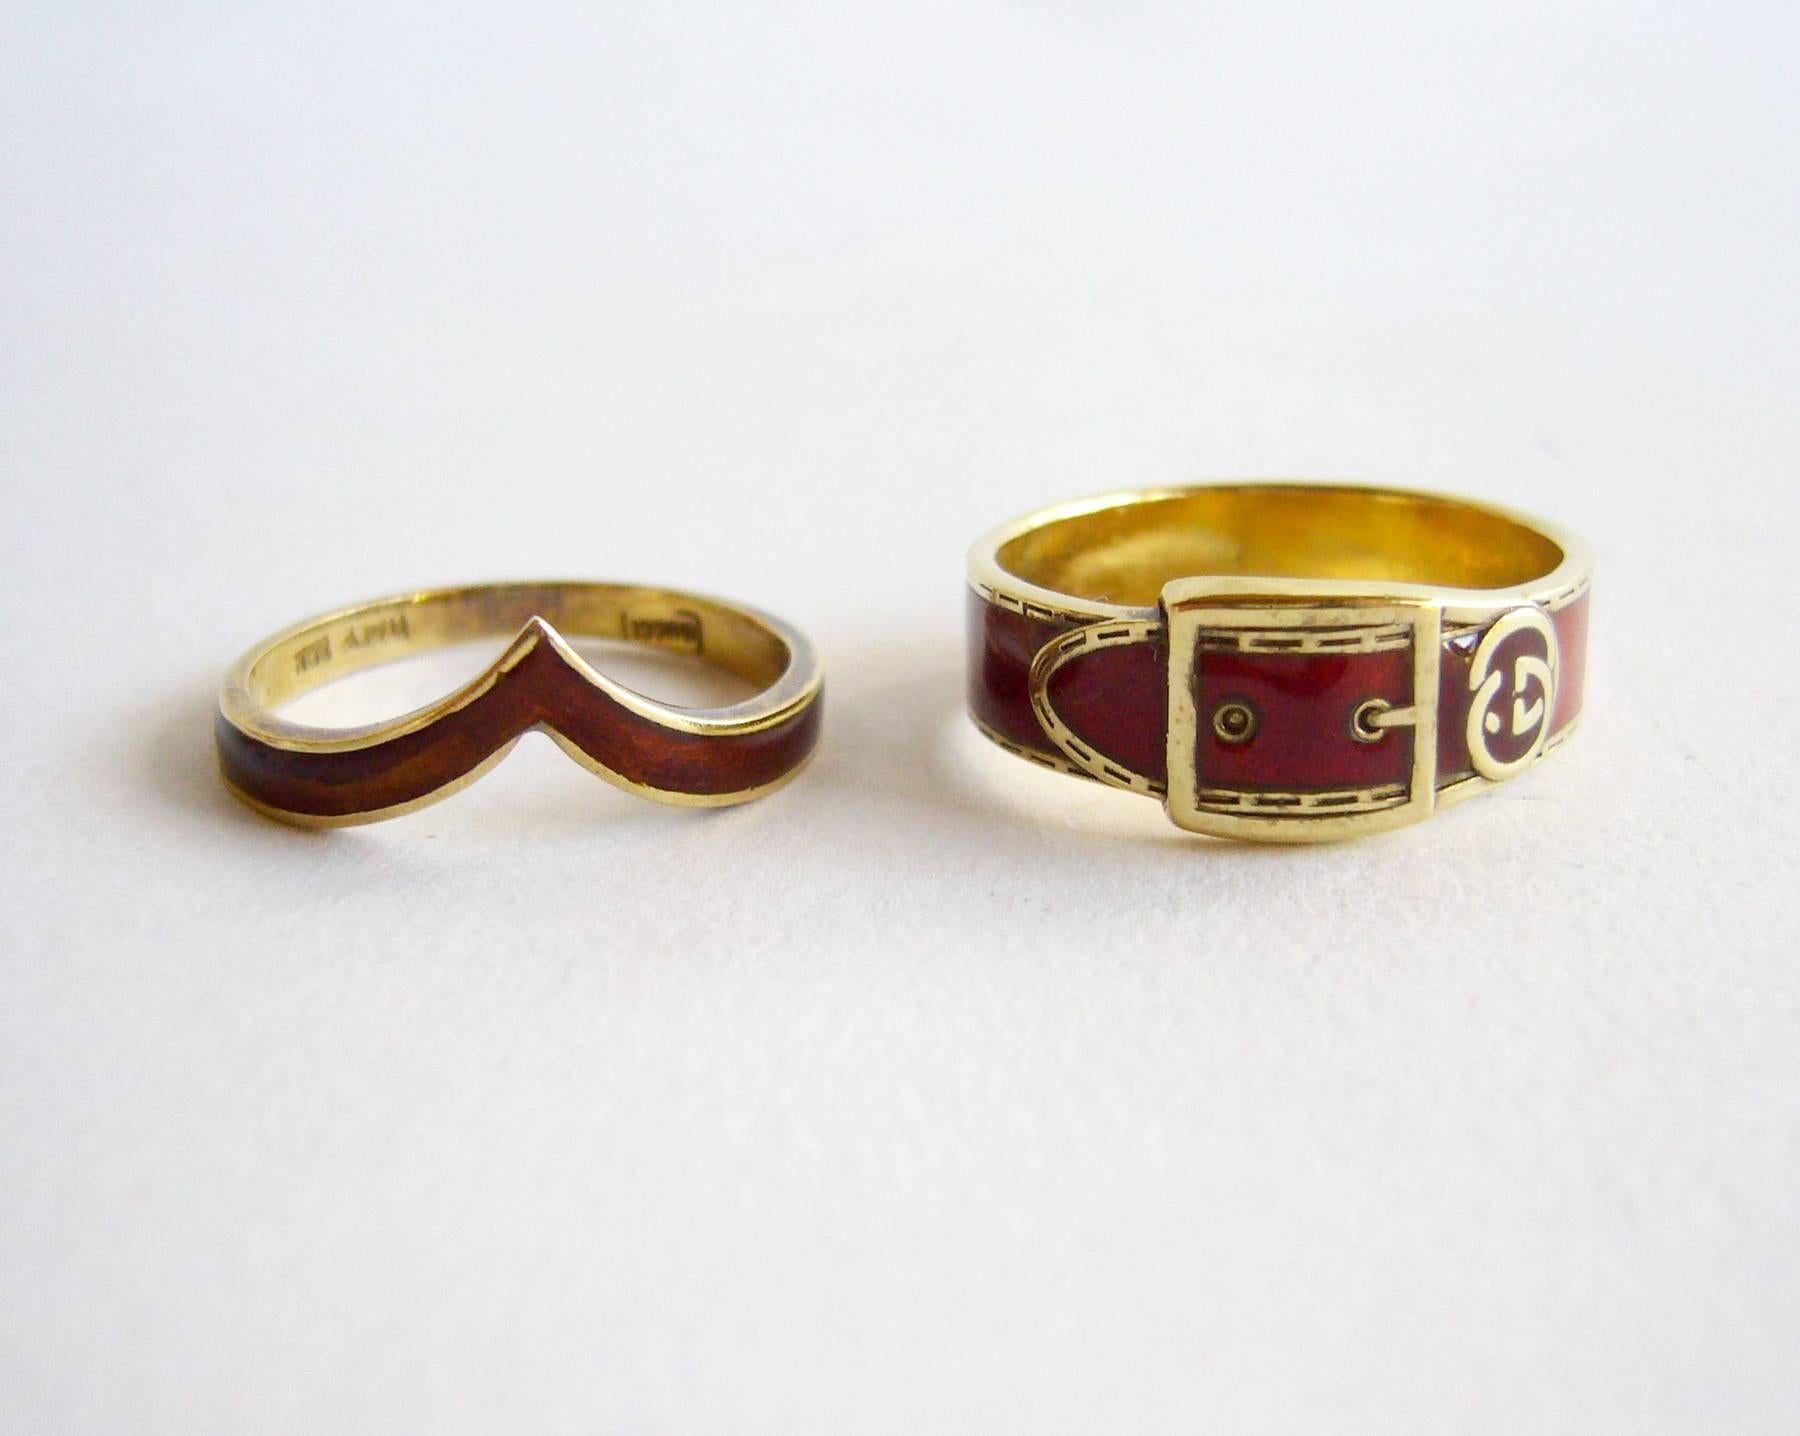 Pair of stackable enamel rings by Gucci of Italy, circa 1960's.  One ring is 18k gold and the other is sterling with gold vermeil. Both are signed Gucci. Rings are a finger size 5.5 and 6.  A great modern day alternate to a wedding or engagement